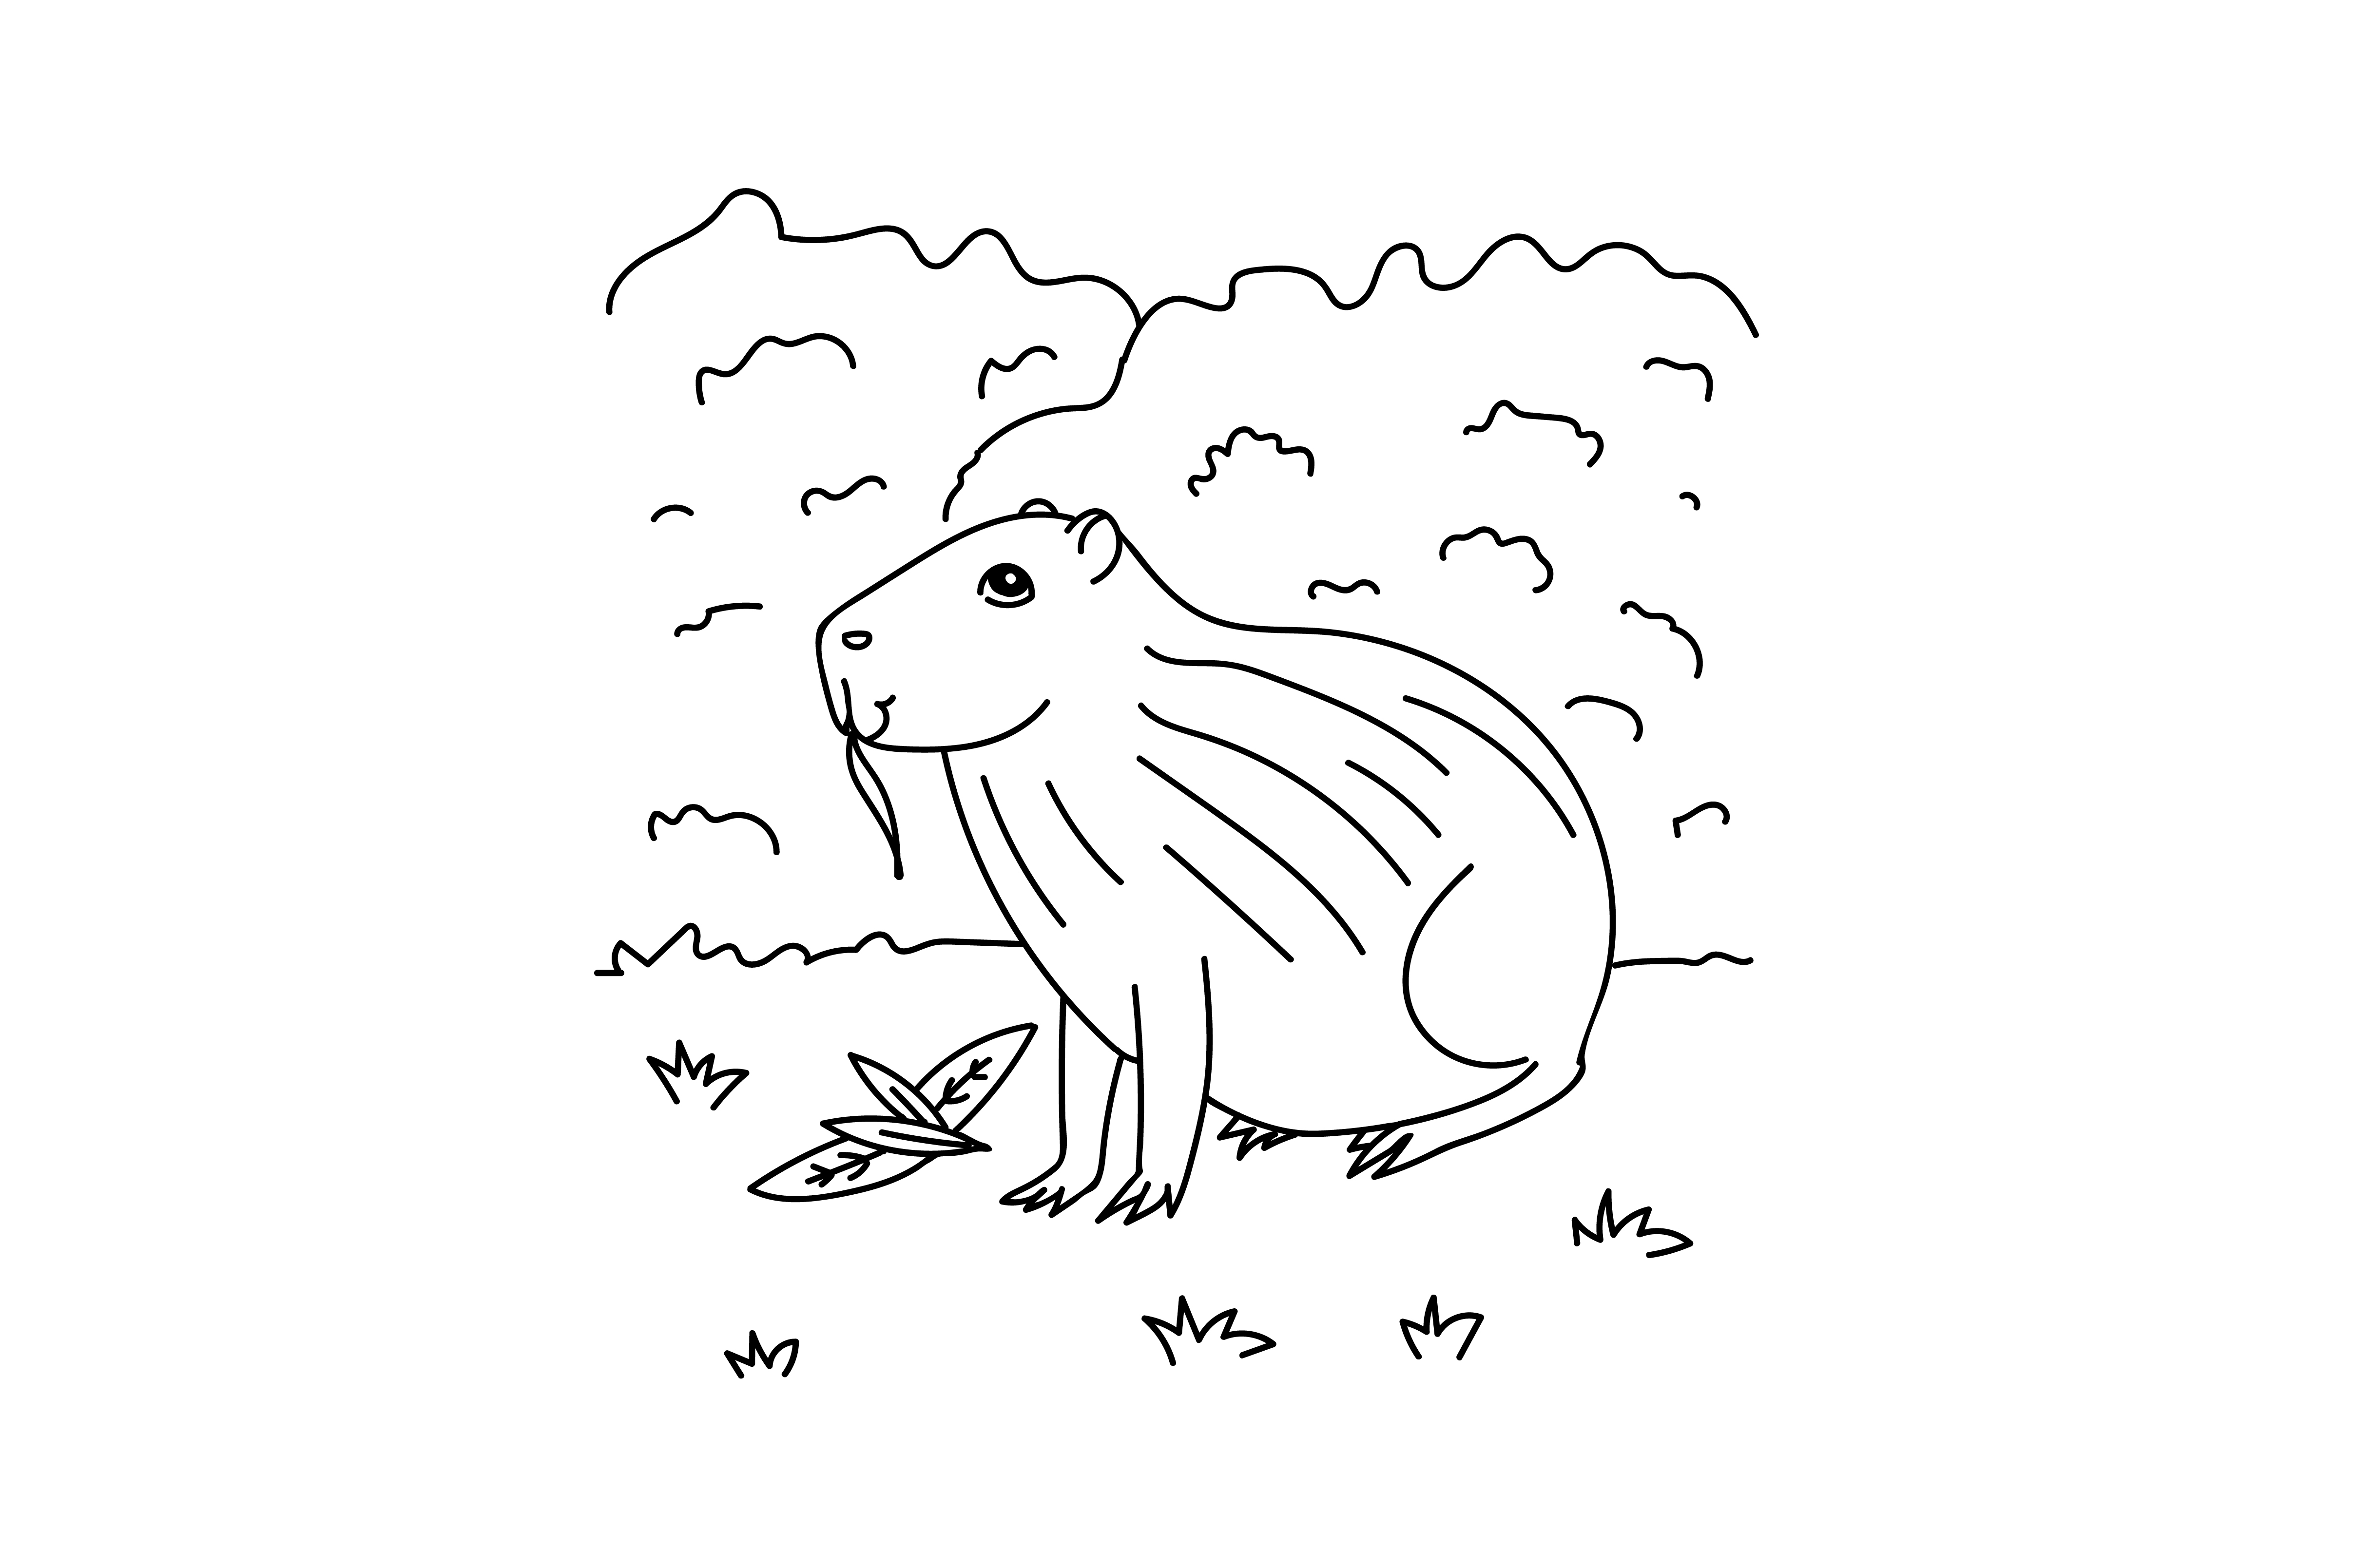 Capybara Coloring Page SVG Cut file by Creative Fabrica Crafts ...